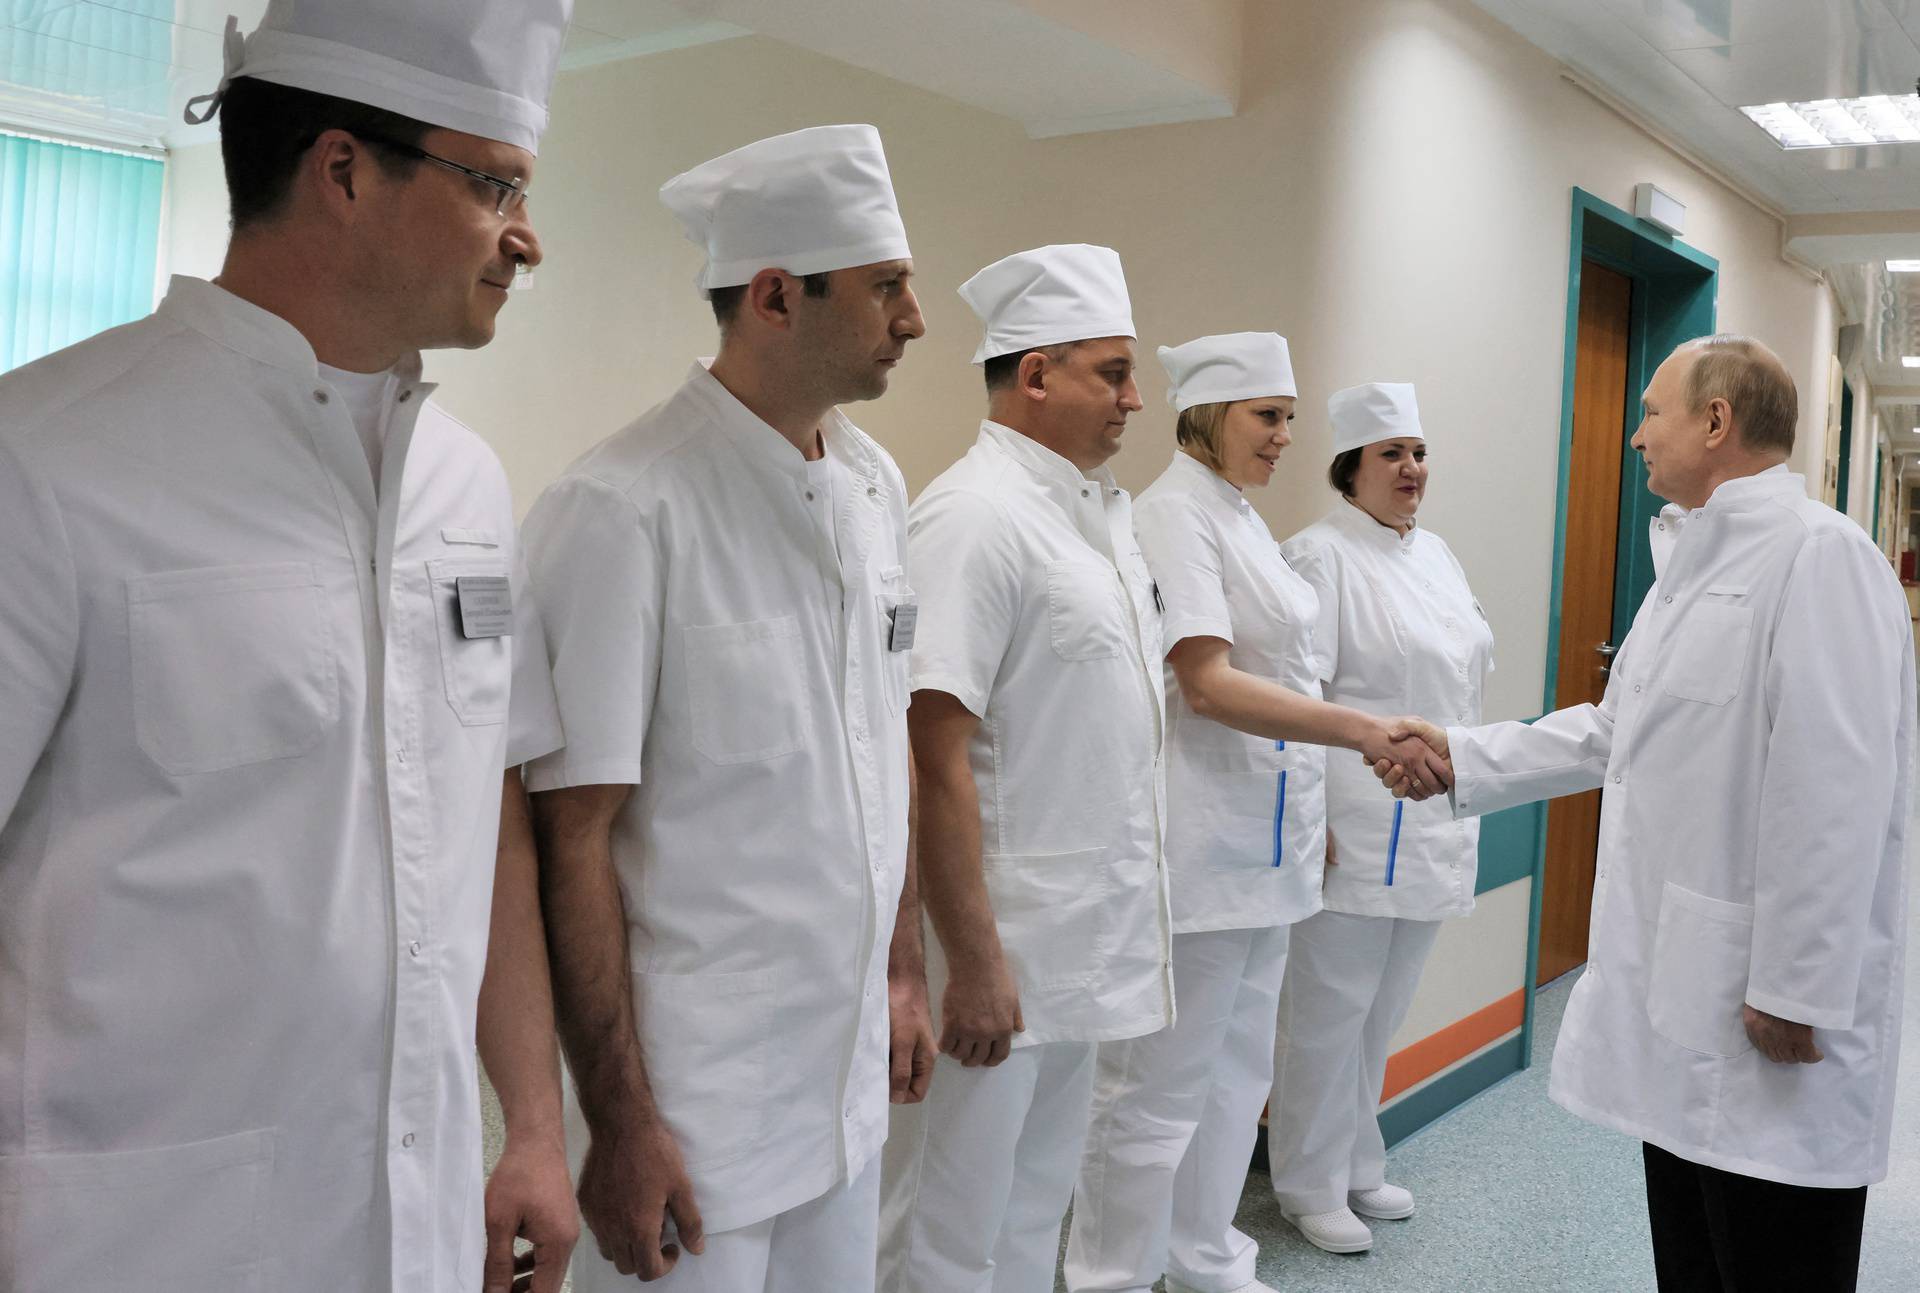 Russian President Vladimir Putin visits soldiers wounded during the conflict in Ukraine at a hospital in Moscow